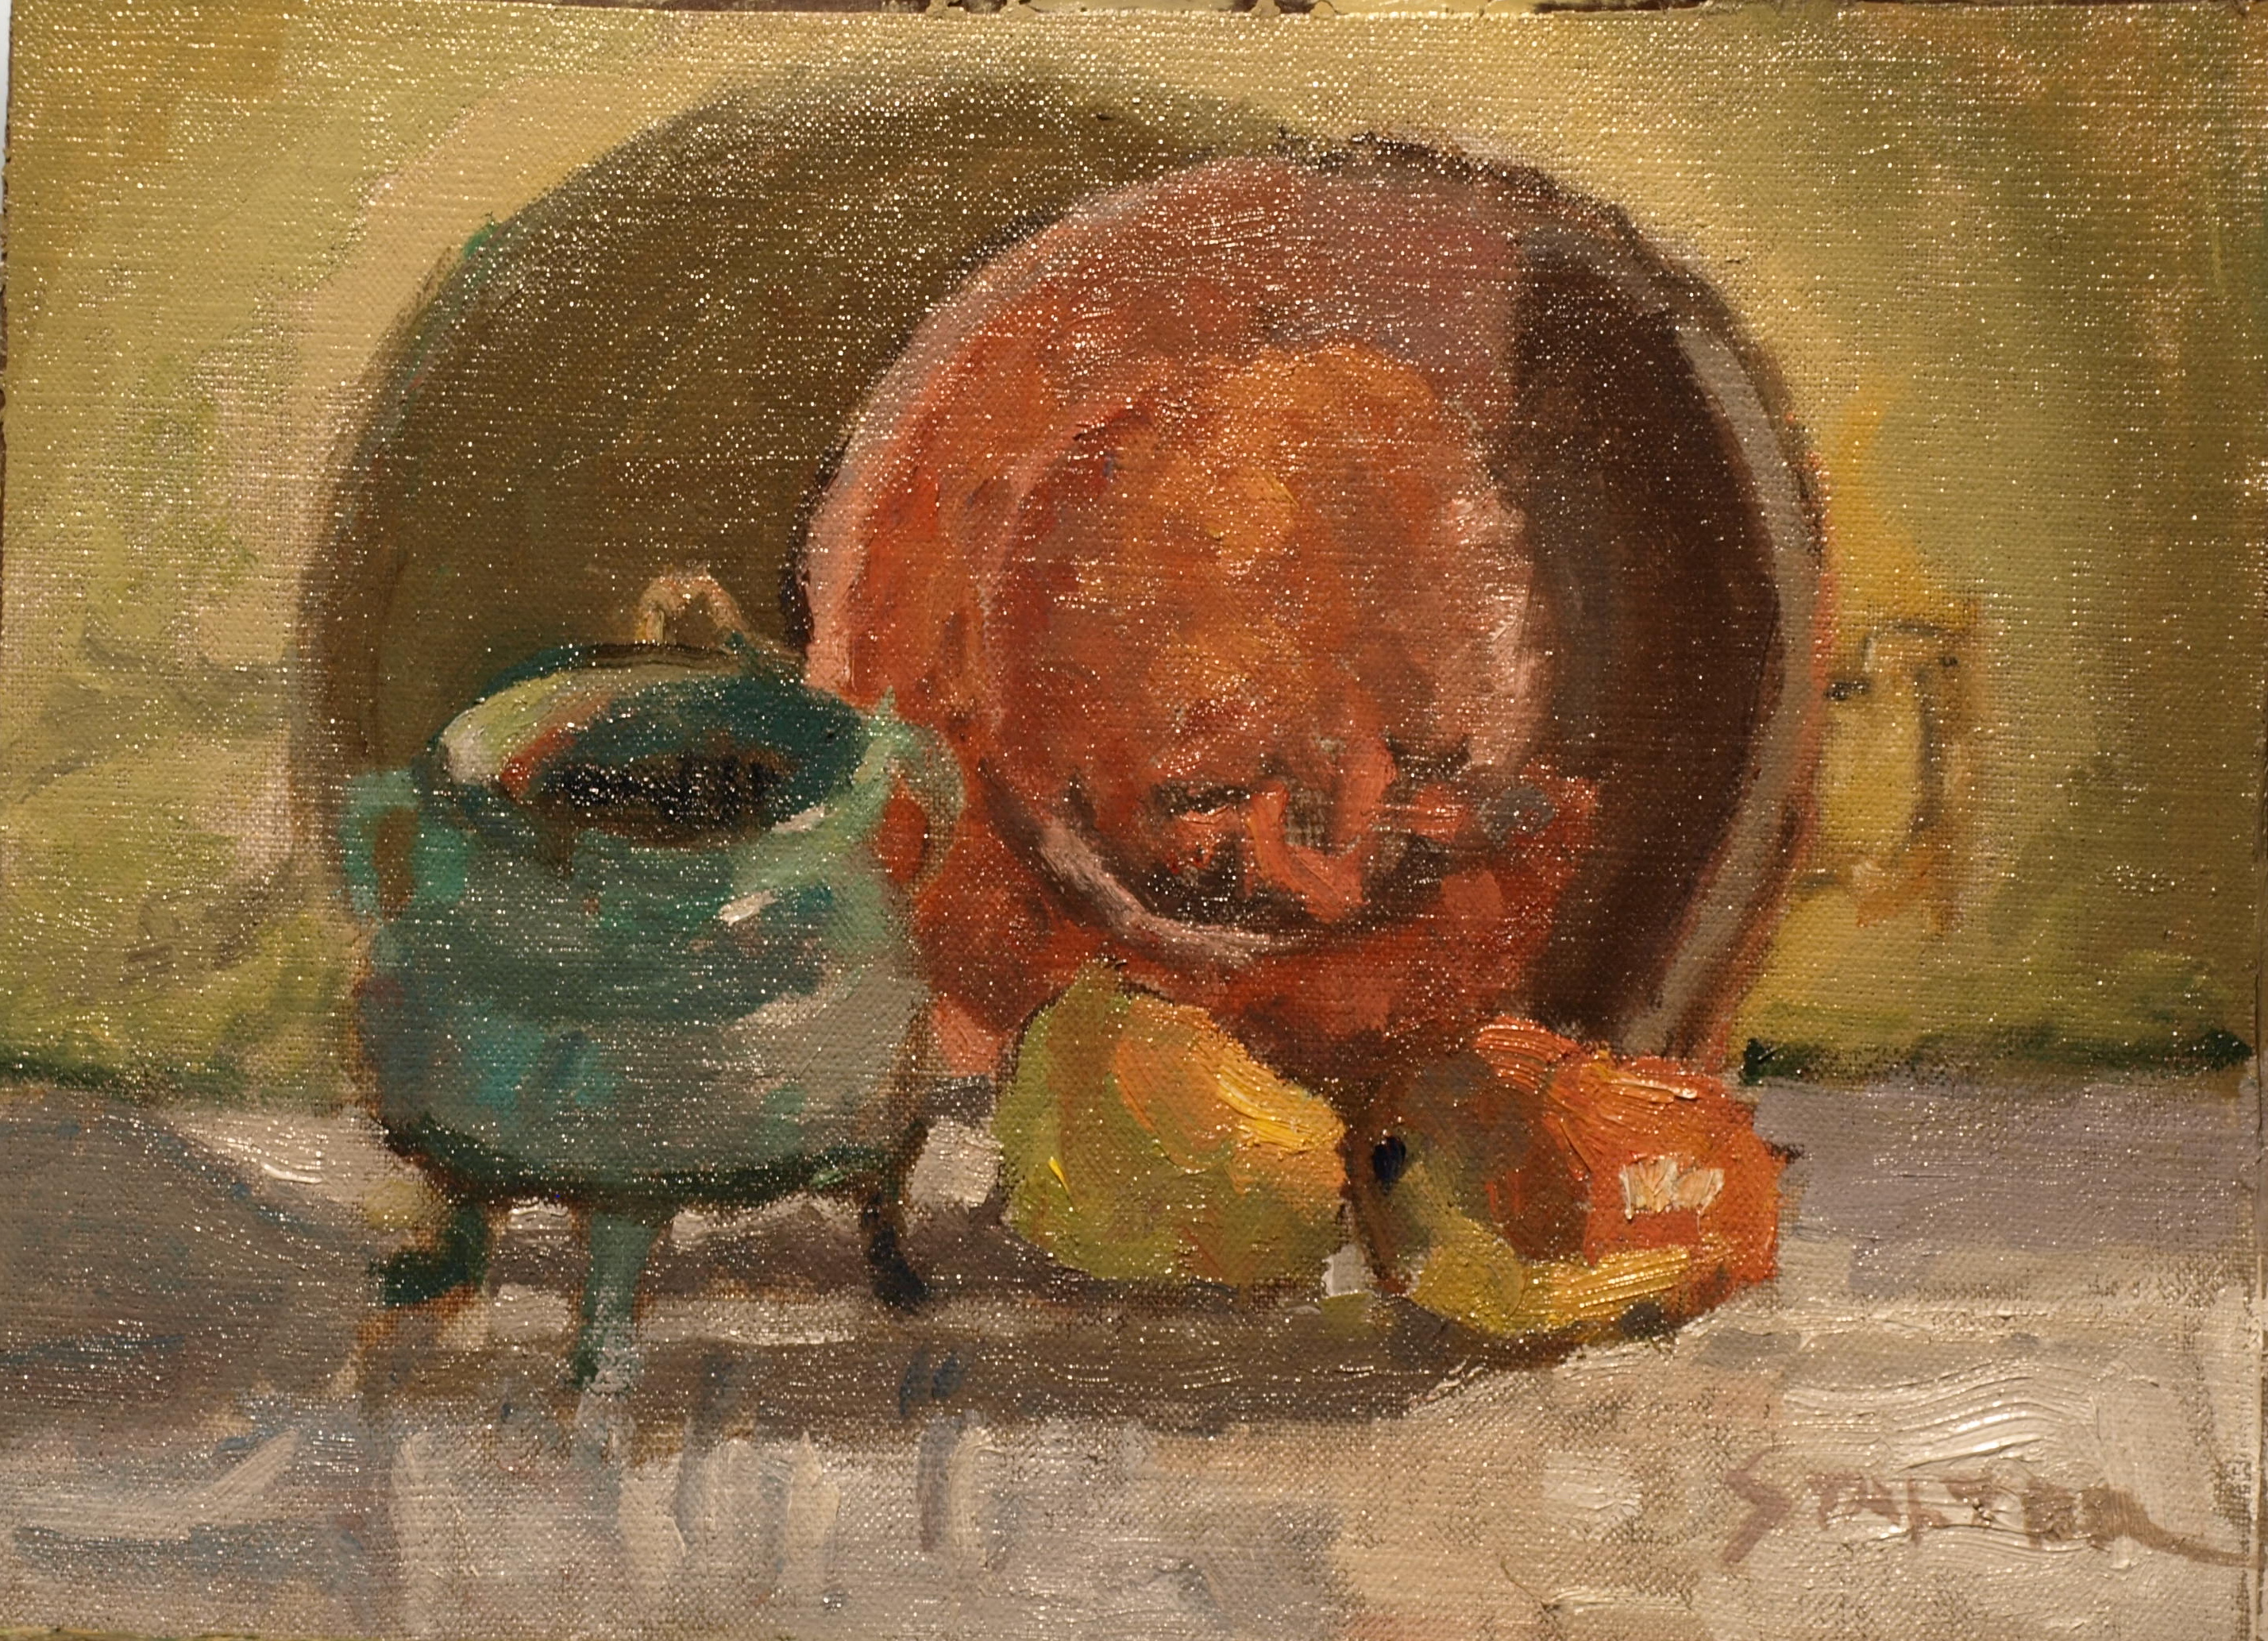 The Copper Pan, Oil on Canvas on Panel, 9 x 12 Inches, by Richard Stalter, $225